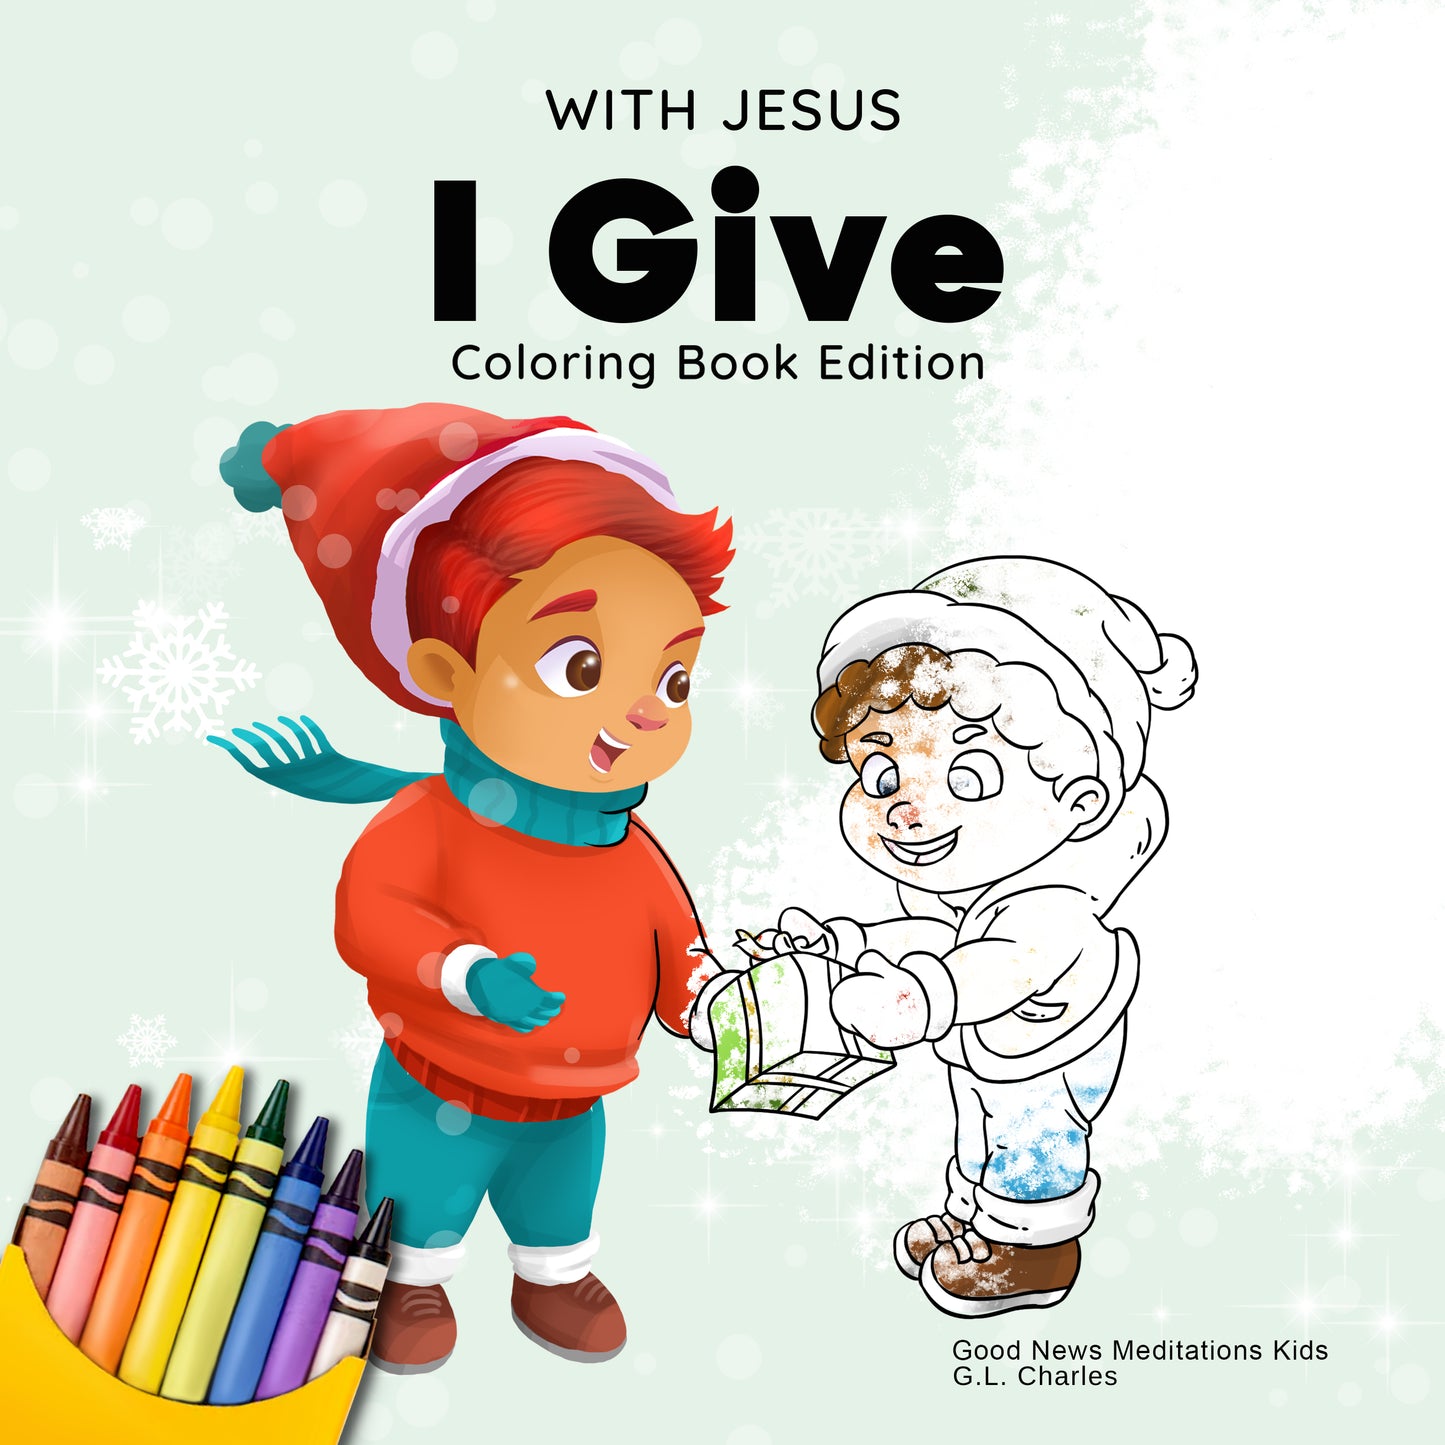 With Jesus I Give Coloring Book - Print Ready - Digital Product - Instant Download